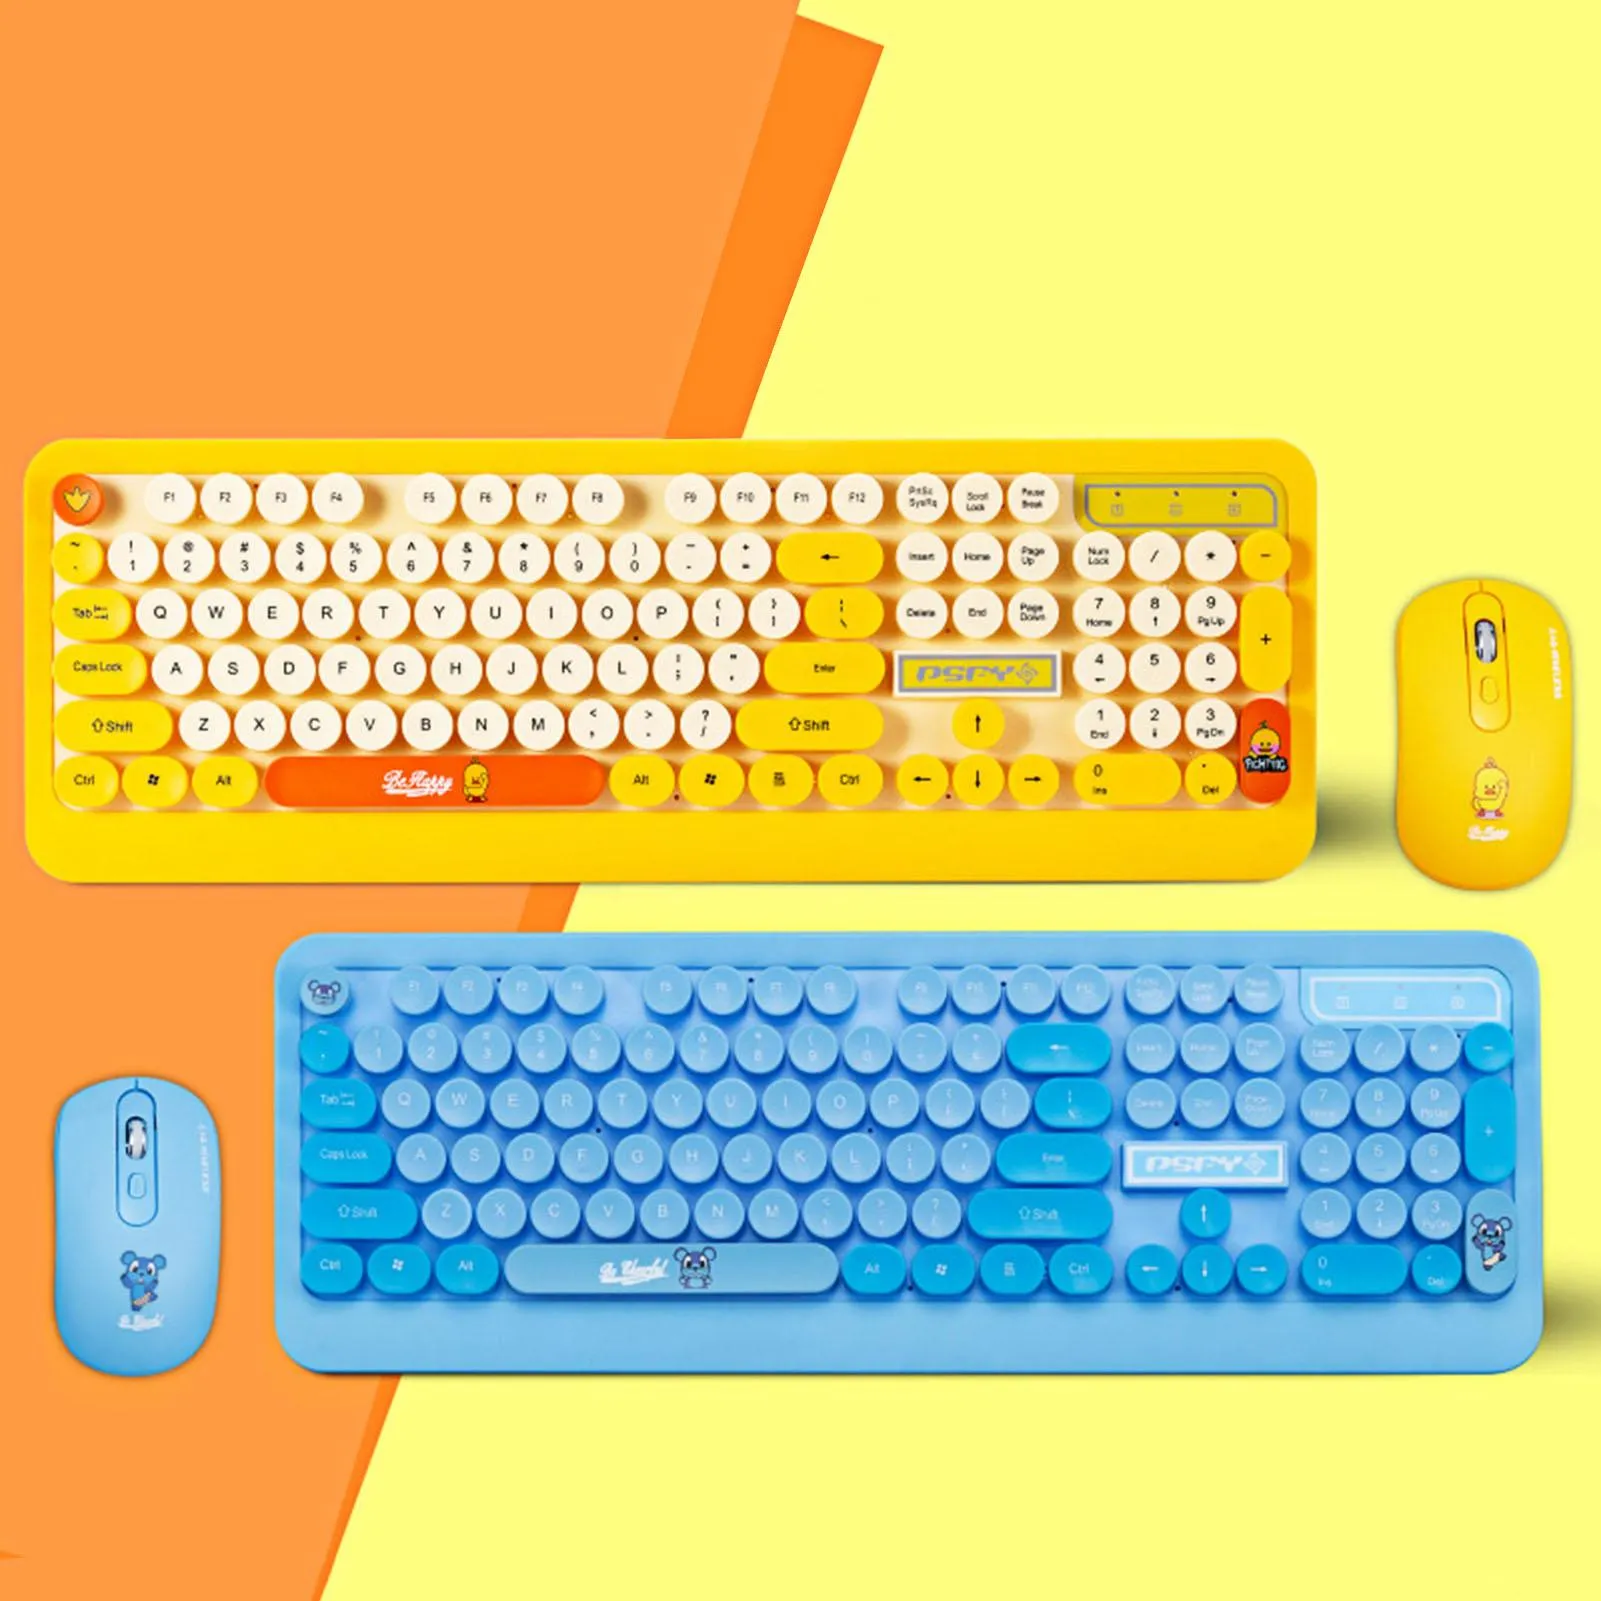 Combos K68 bluetoothcompatible Game Keyboard And Mouse Wireless Combination 2.4GHz Kit Set 104key Cartoon Cute Retro Round Waterproof